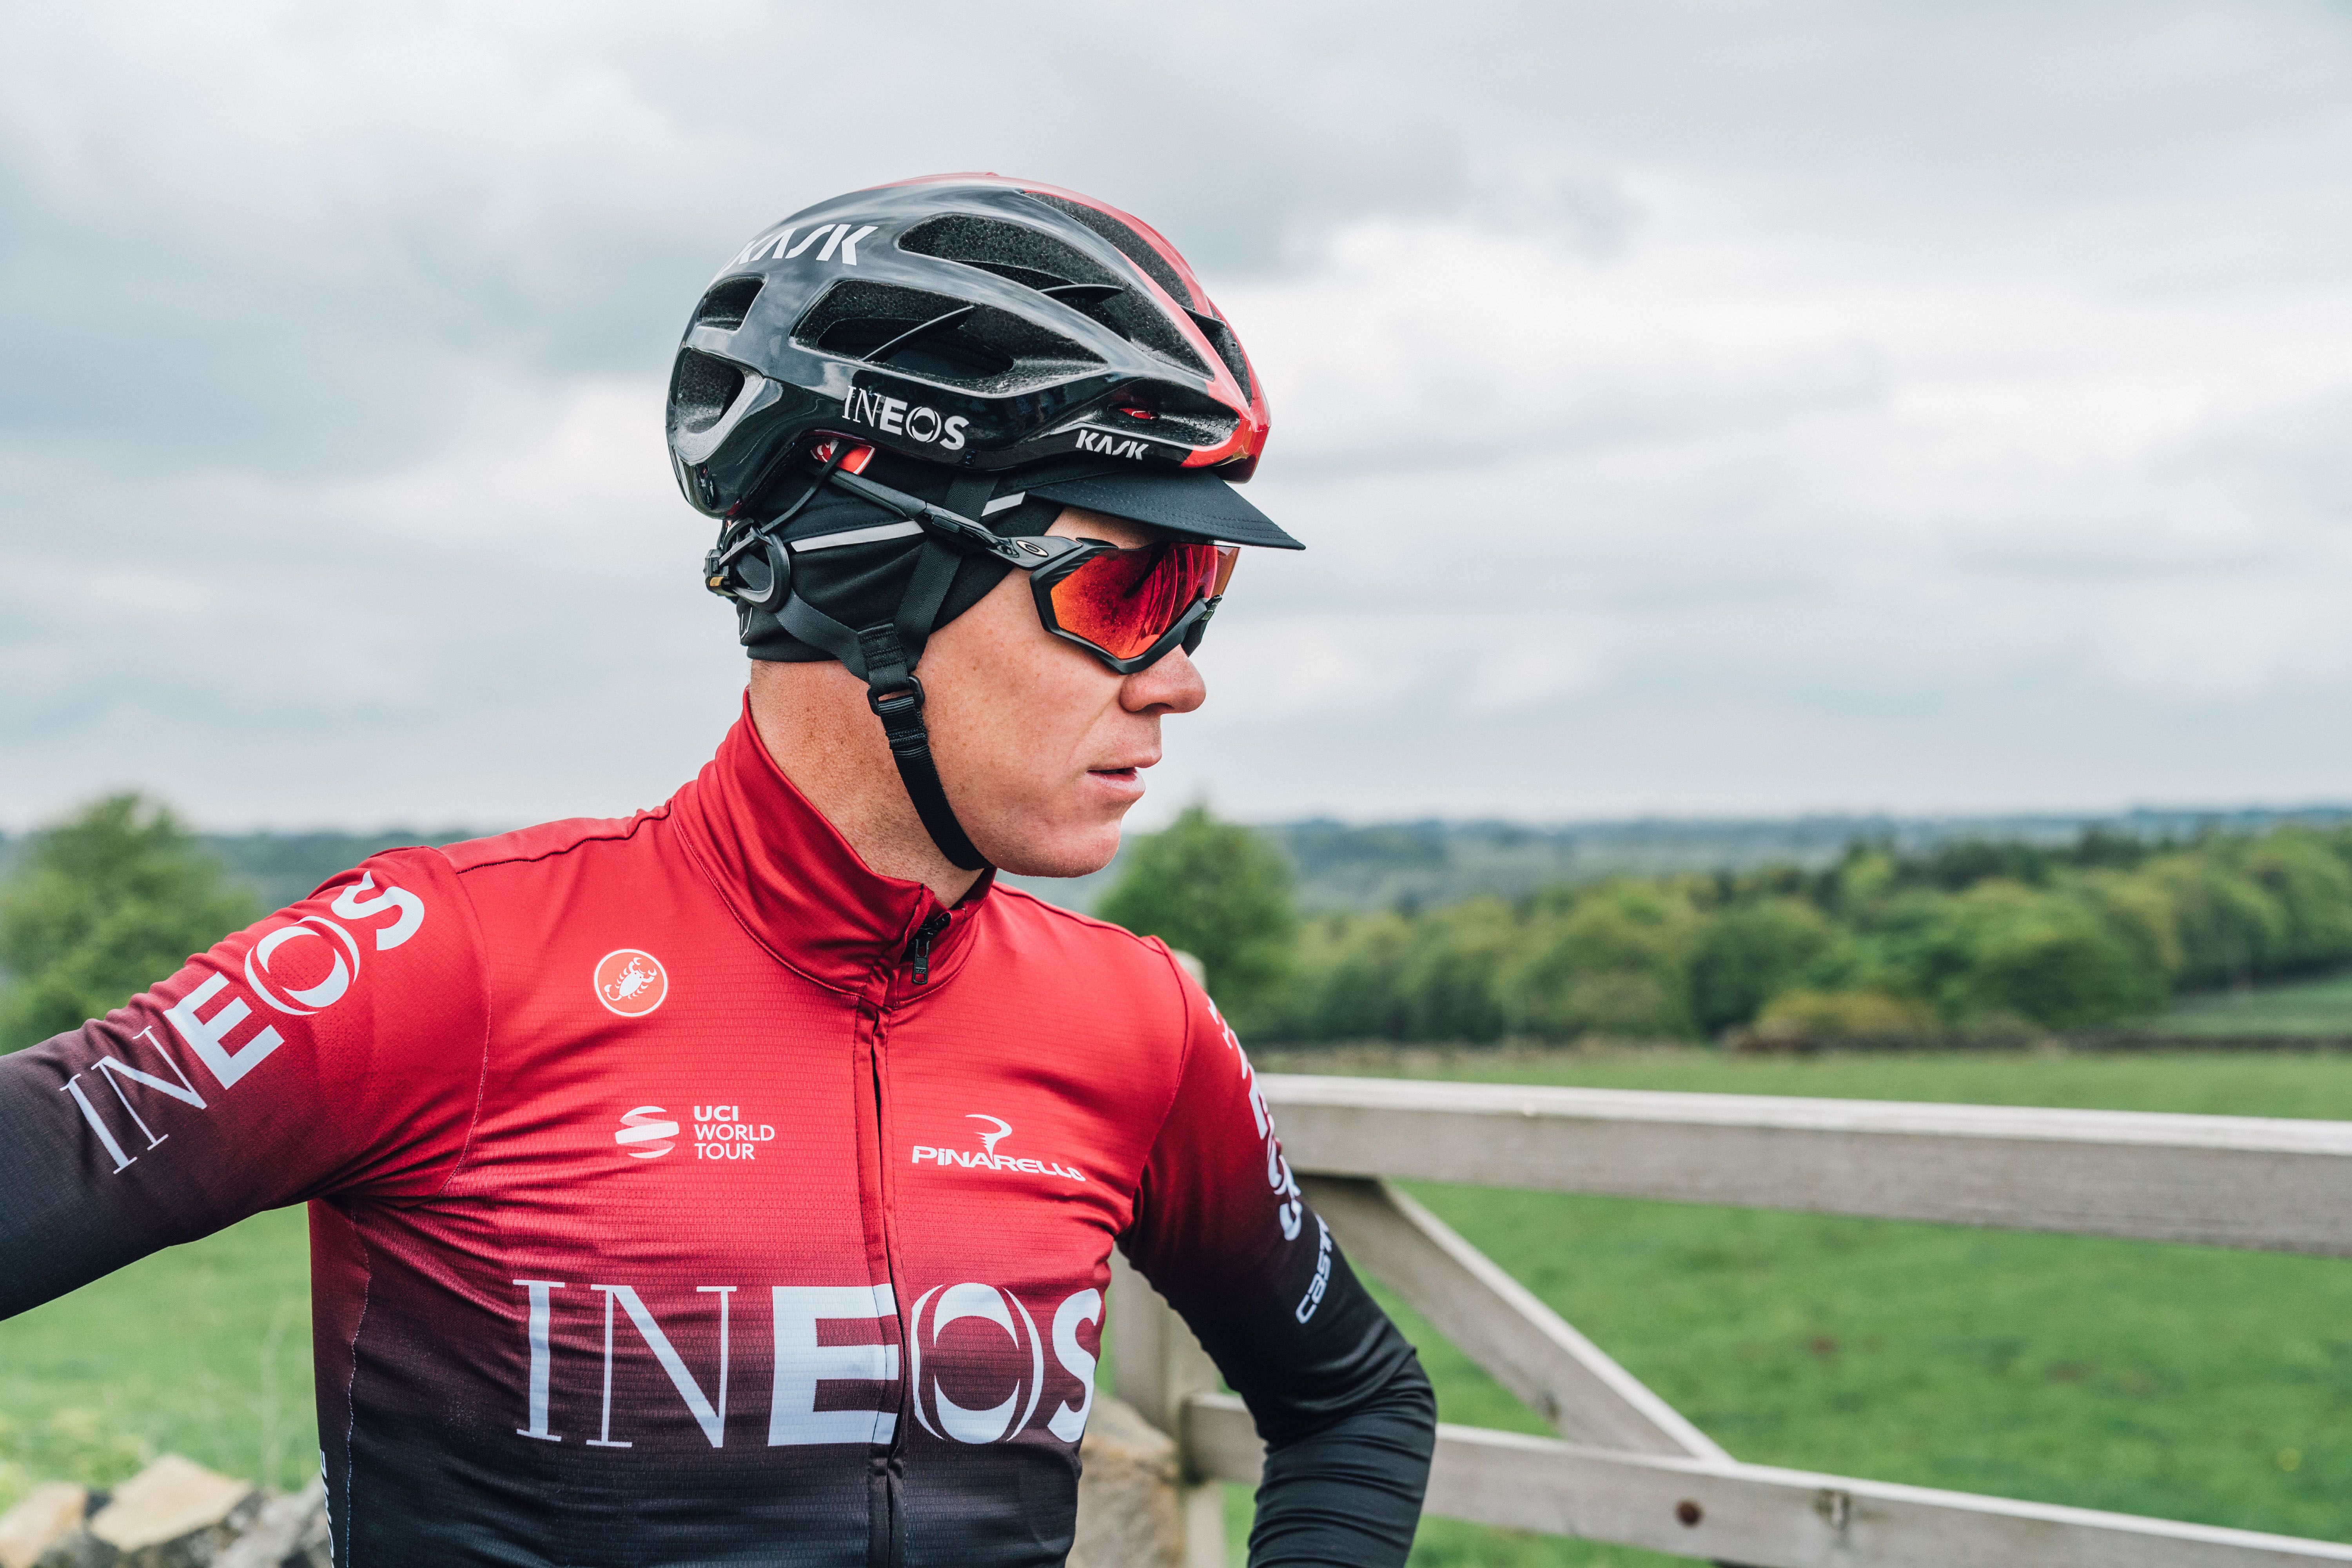 team ineos cycling jersey